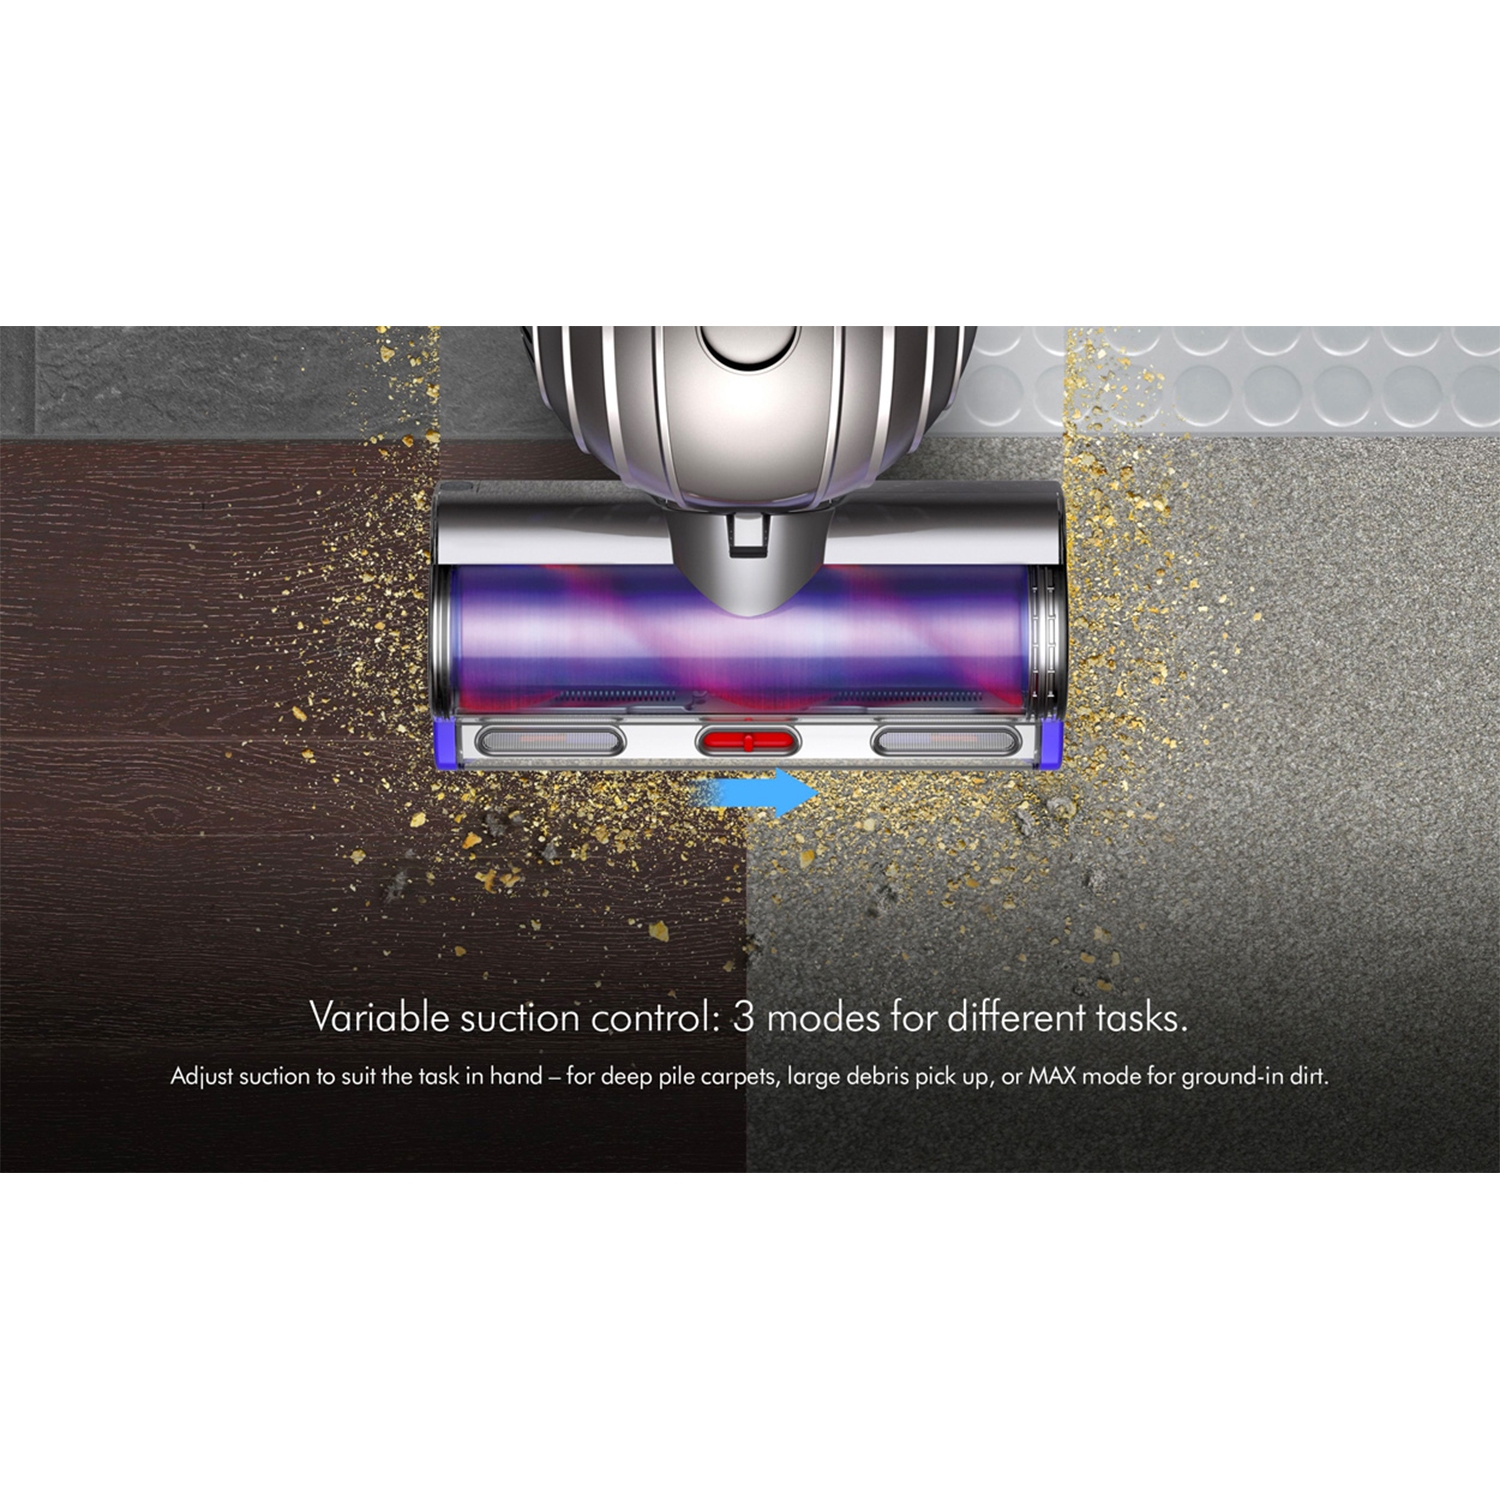 Dyson Small Ball Allergy Bagless Upright Vacuum Cleaner - 6